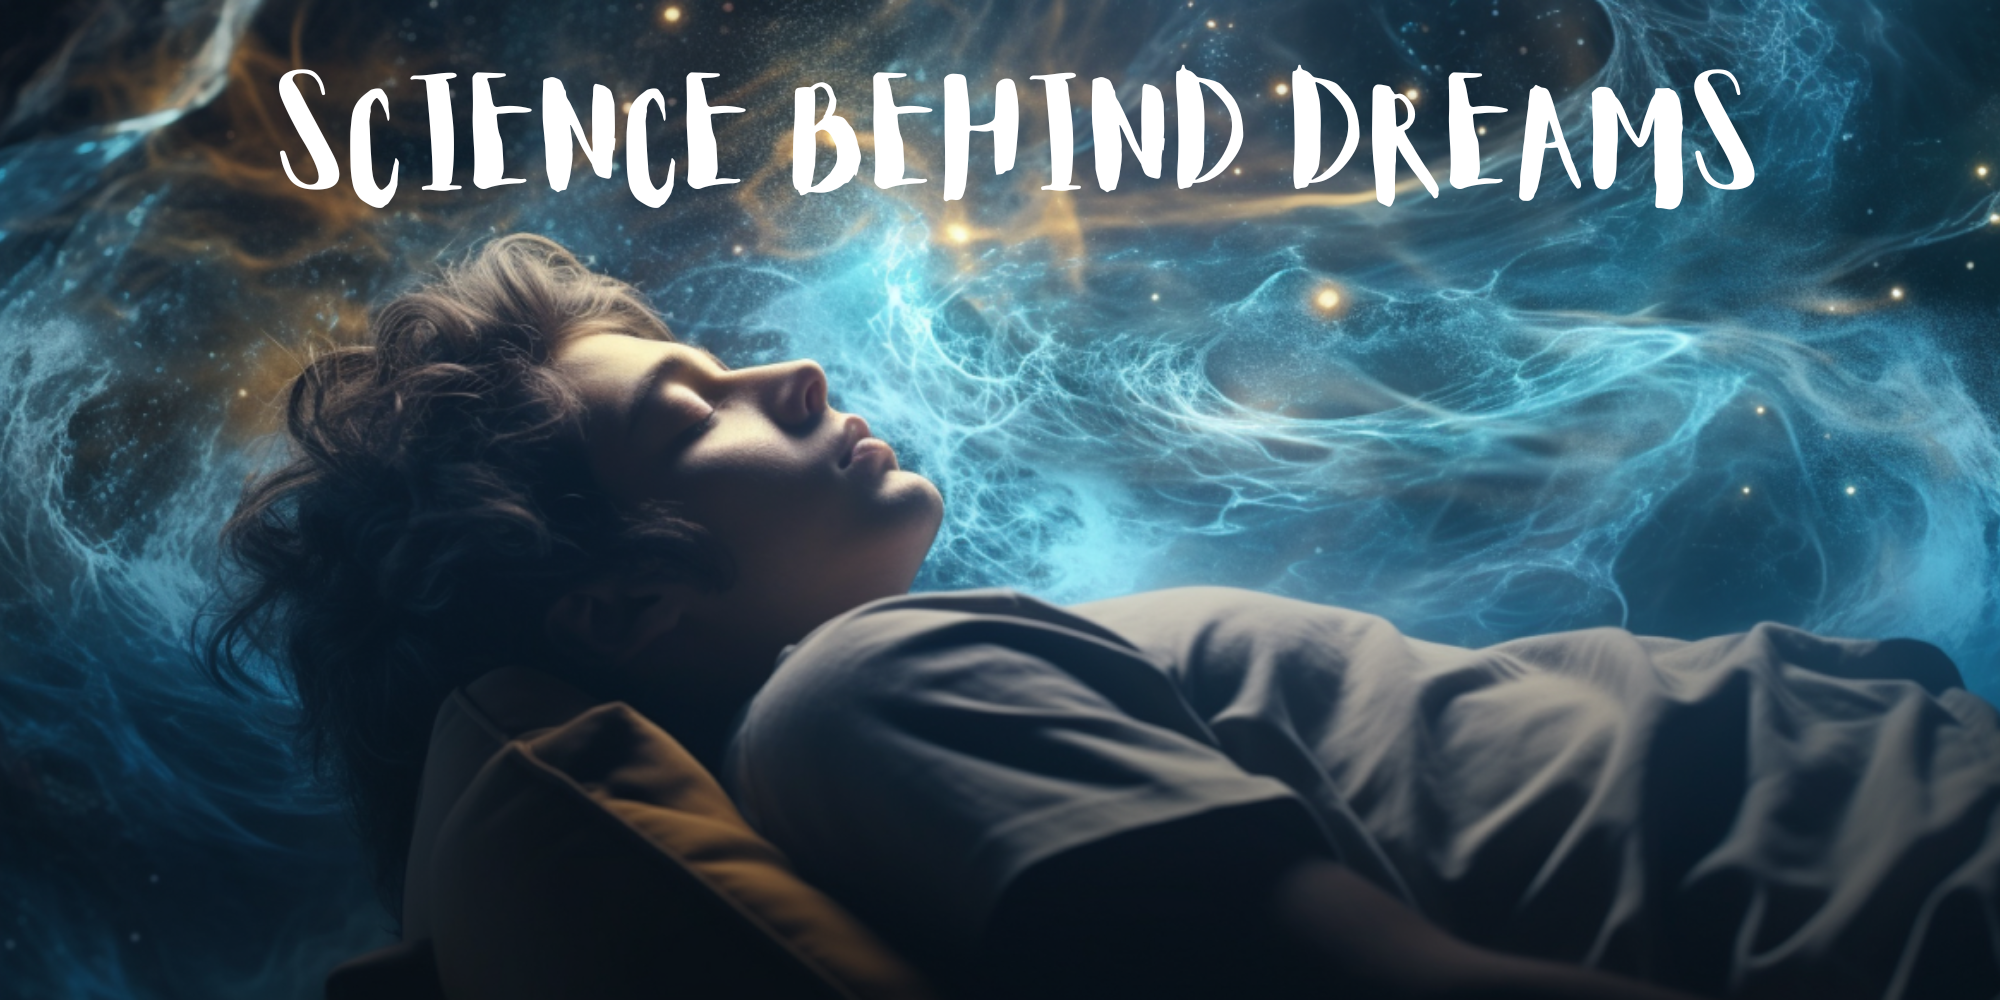 Decoding Dreams: 6 Fascinating Facts Proven by Science